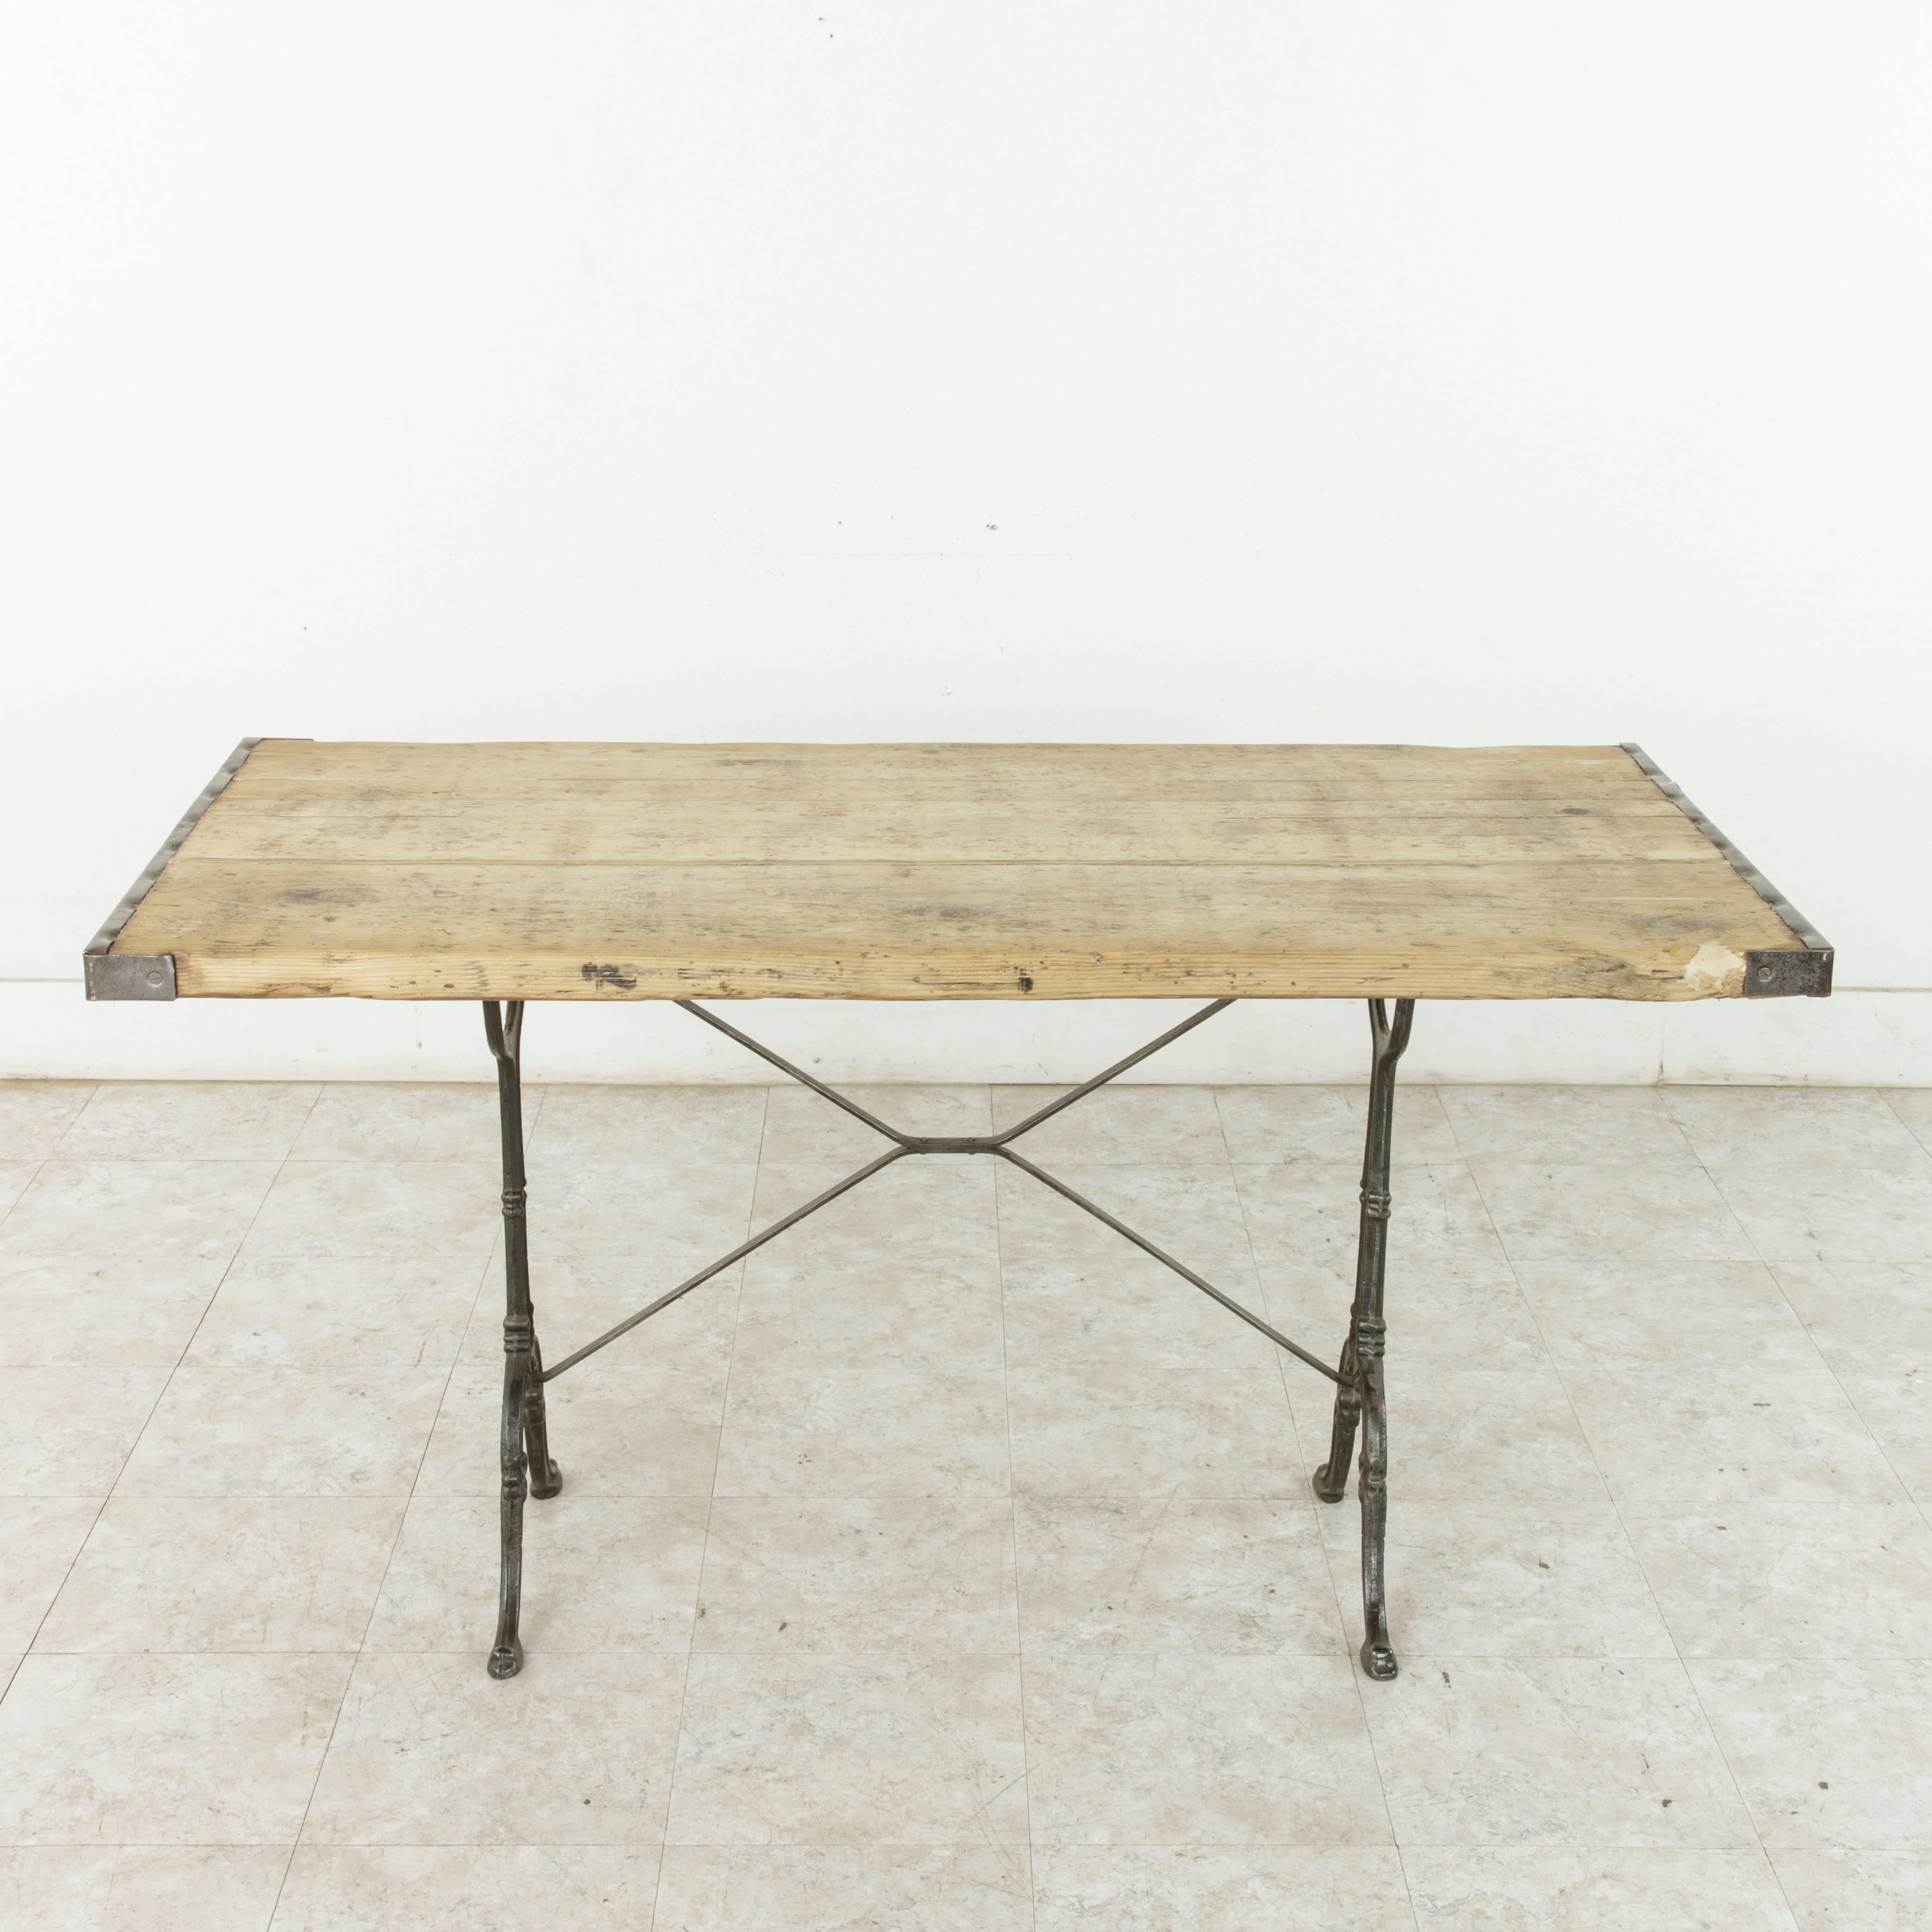 This early 20th century cast iron bistro table features a rustic unfinished pine top trimmed in iron on both sides. The classic scrolled cast iron legs of the piece are joined by an X-stretcher that provides additional stability. Ideal for a